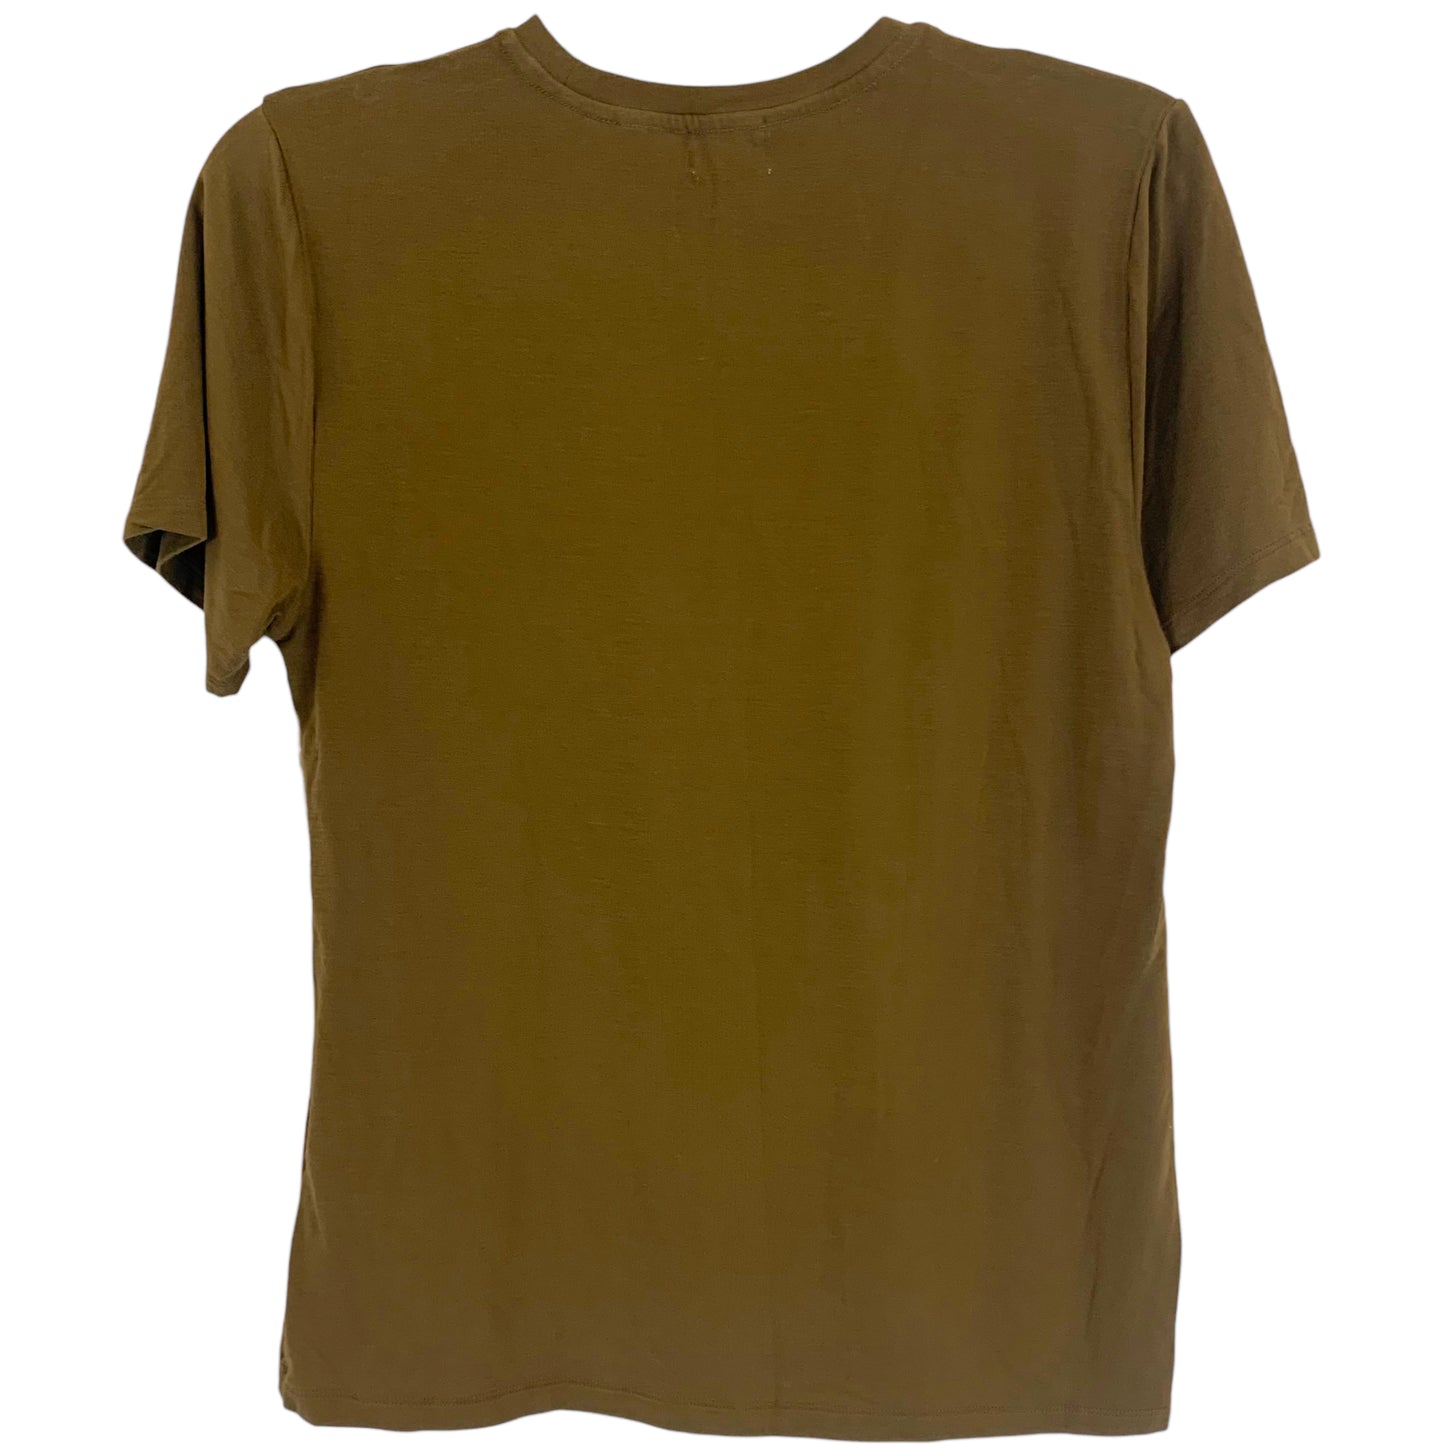 Top Short Sleeve Basic By Wilfred Free Size: XS